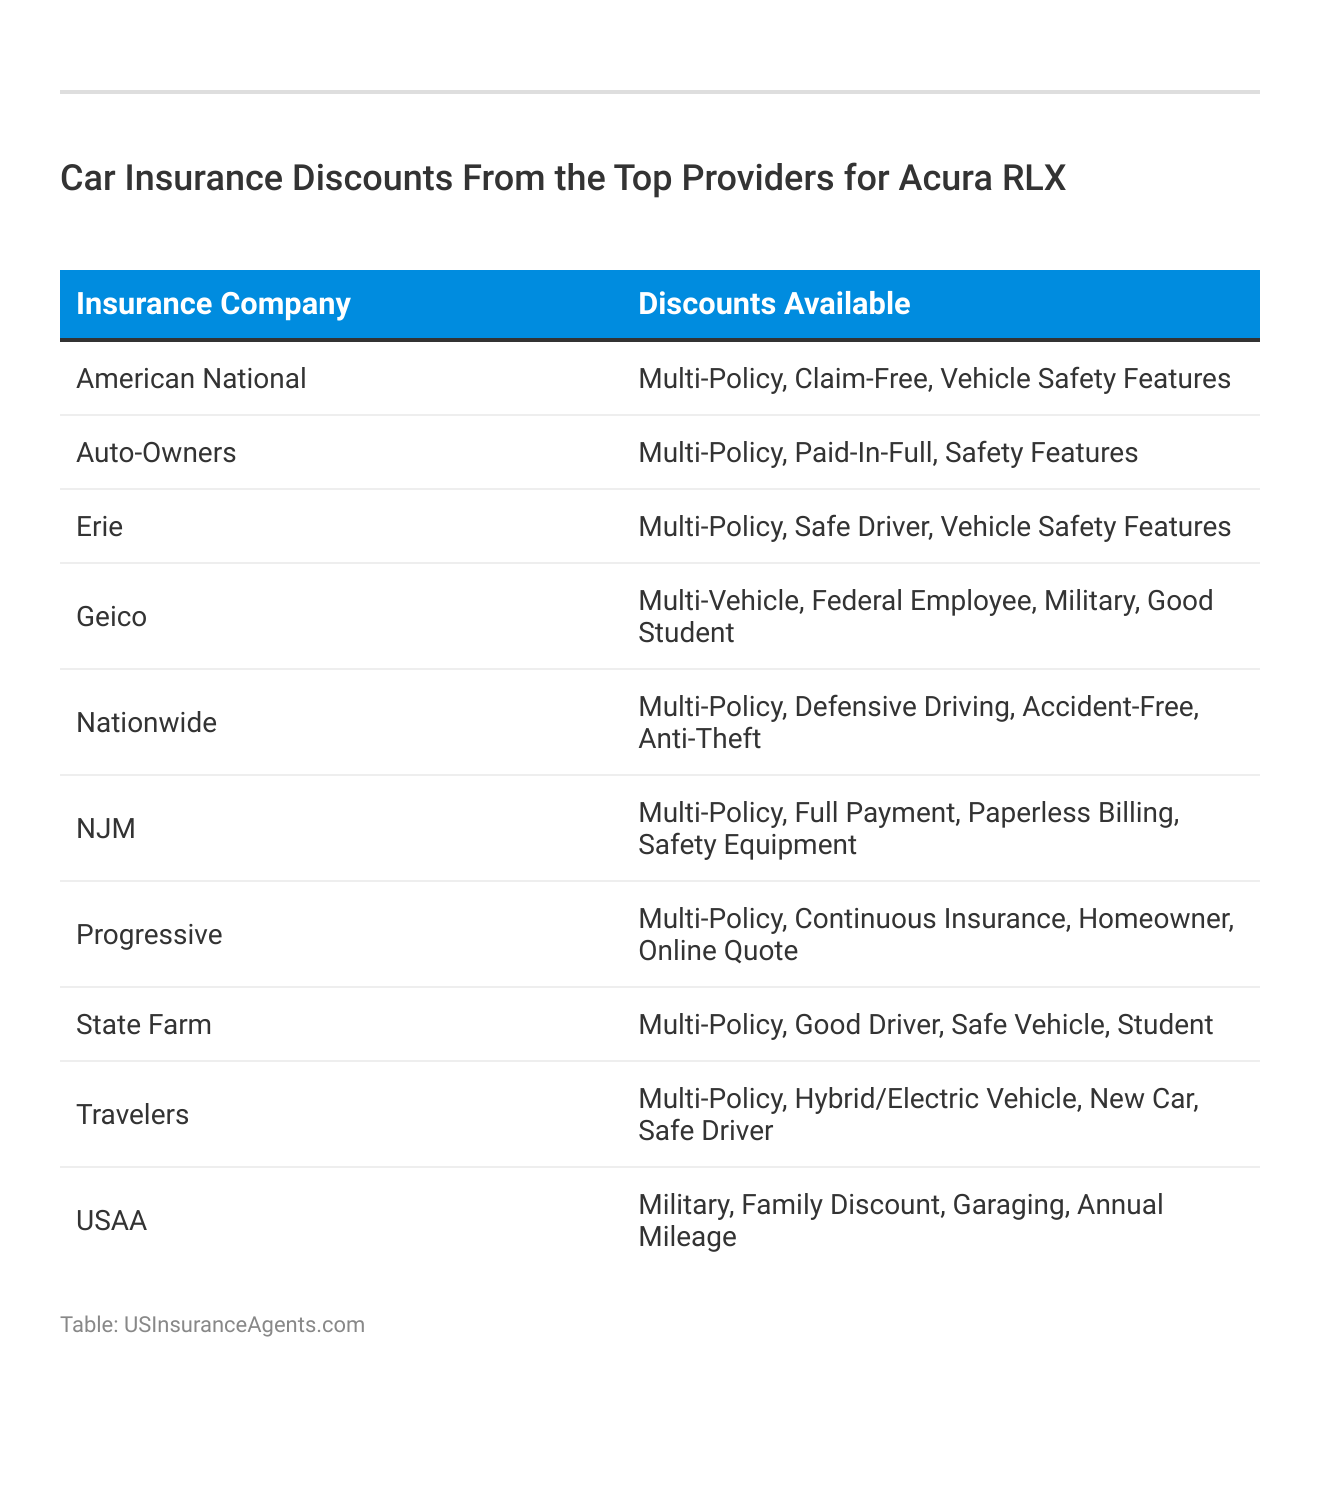 <h3>Car Insurance Discounts From the Top Providers for Acura RLX</h3>